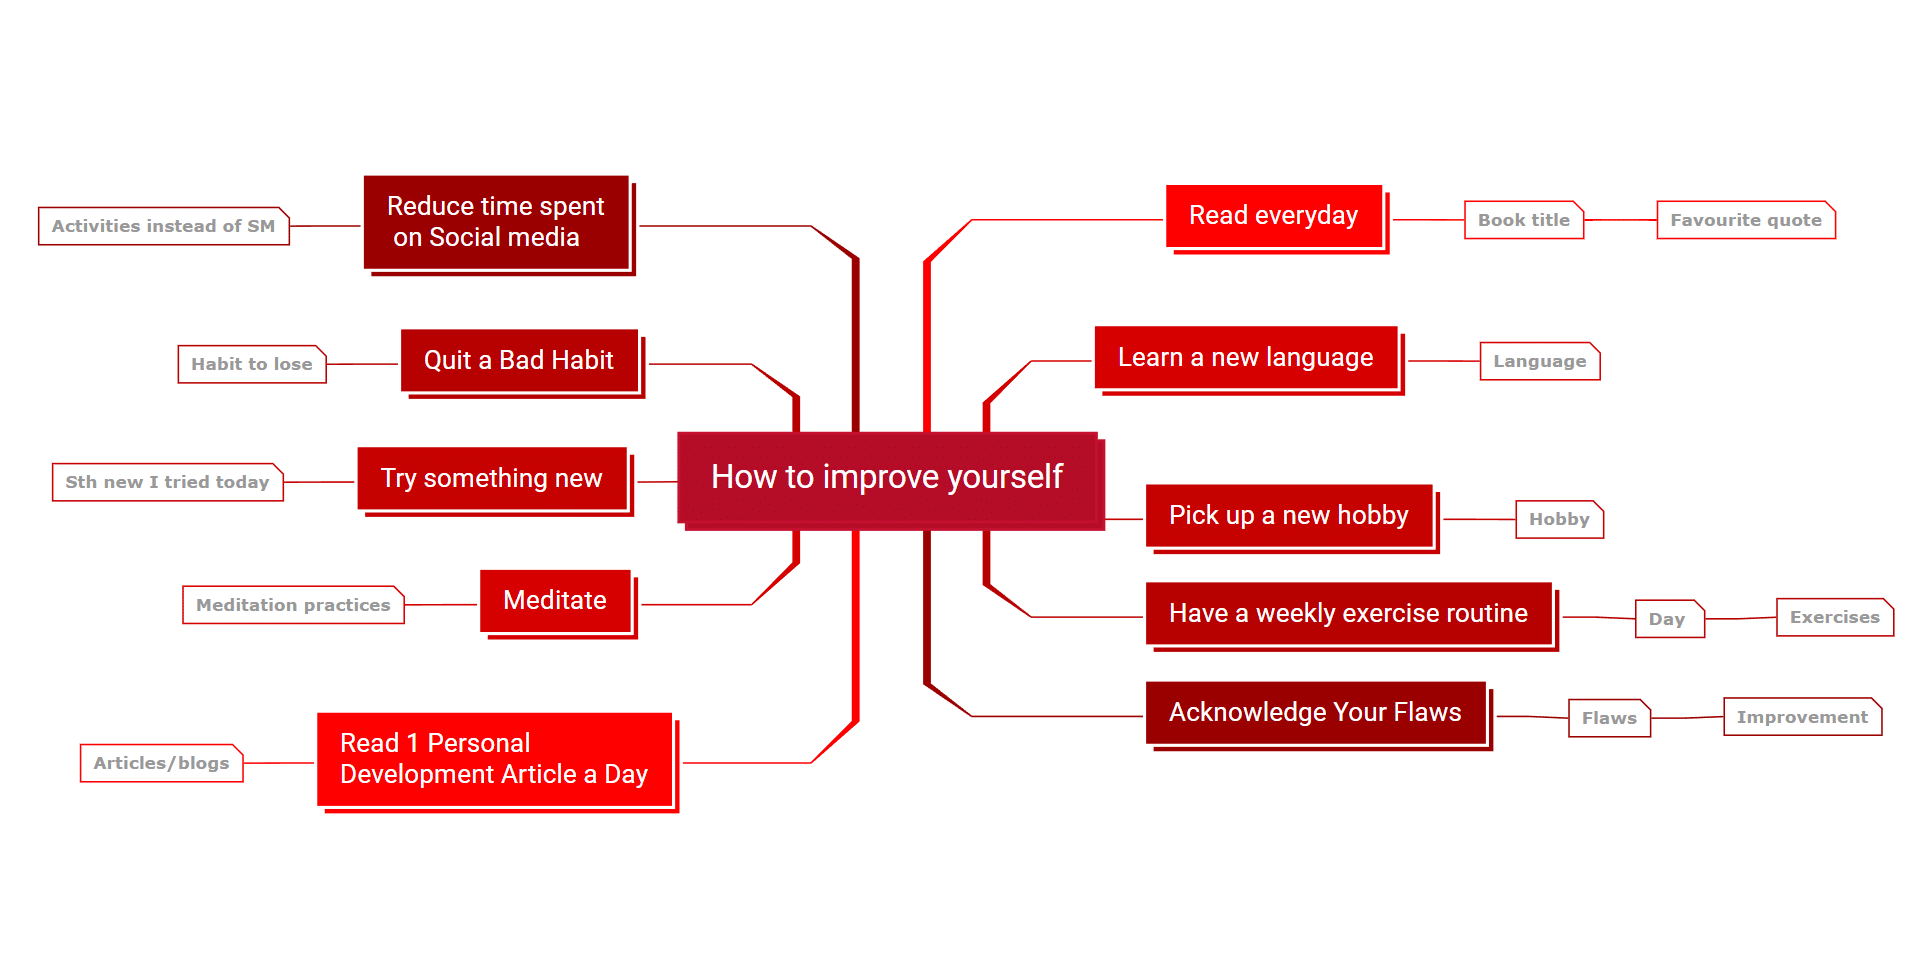 How to improve yourself mind map